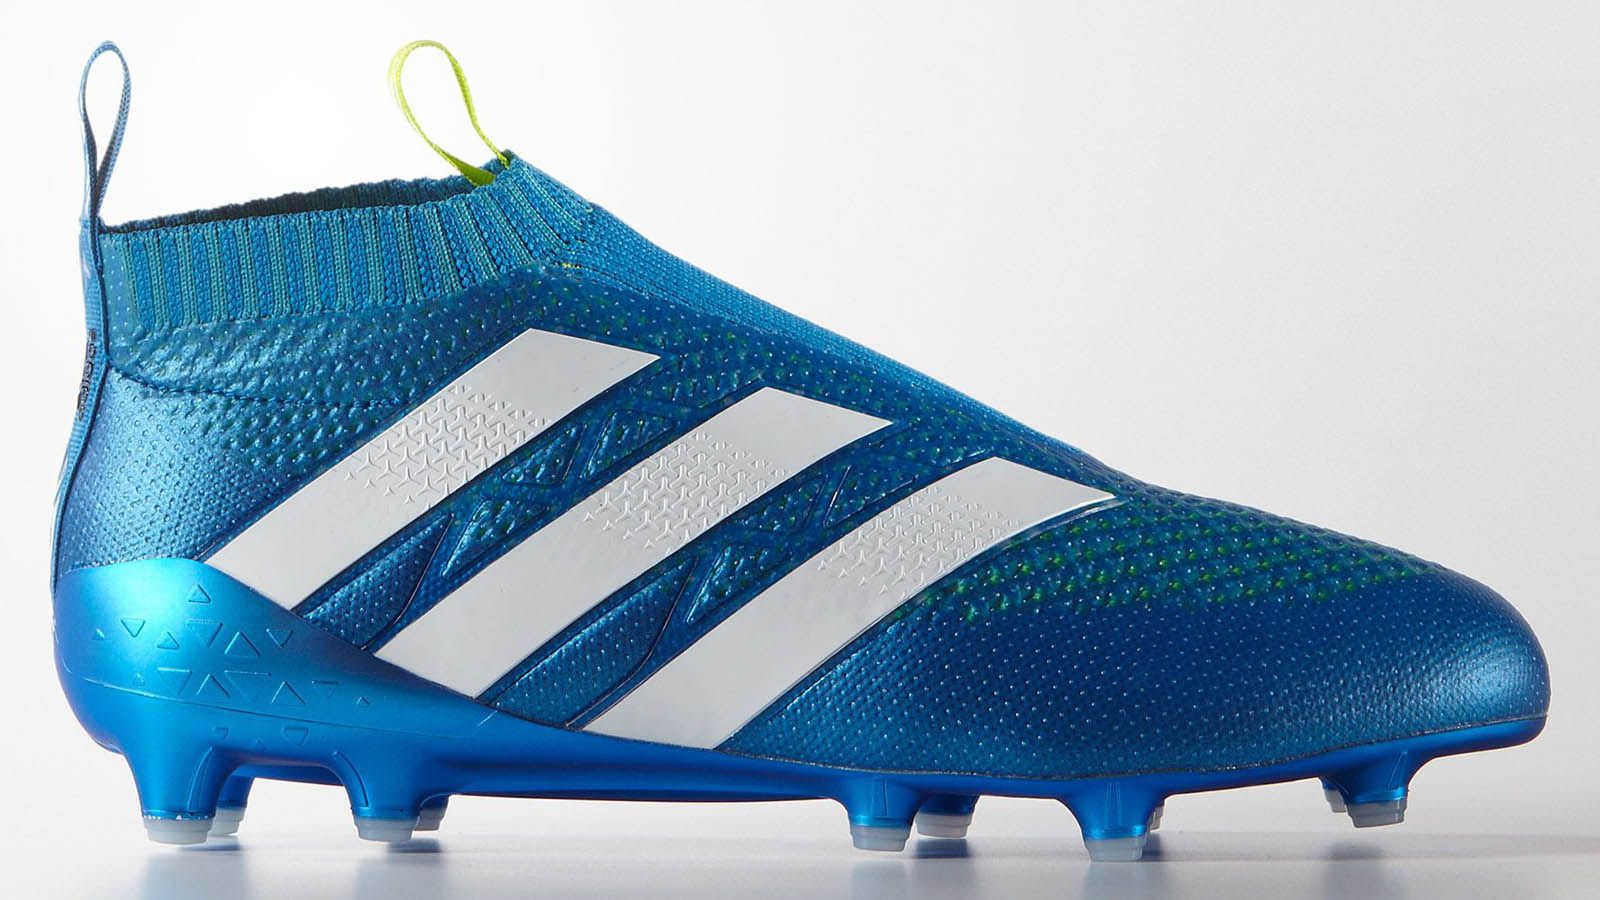 Shock Blue Adidas Ace 16+ PureControl Boots Released - Footy Headlines